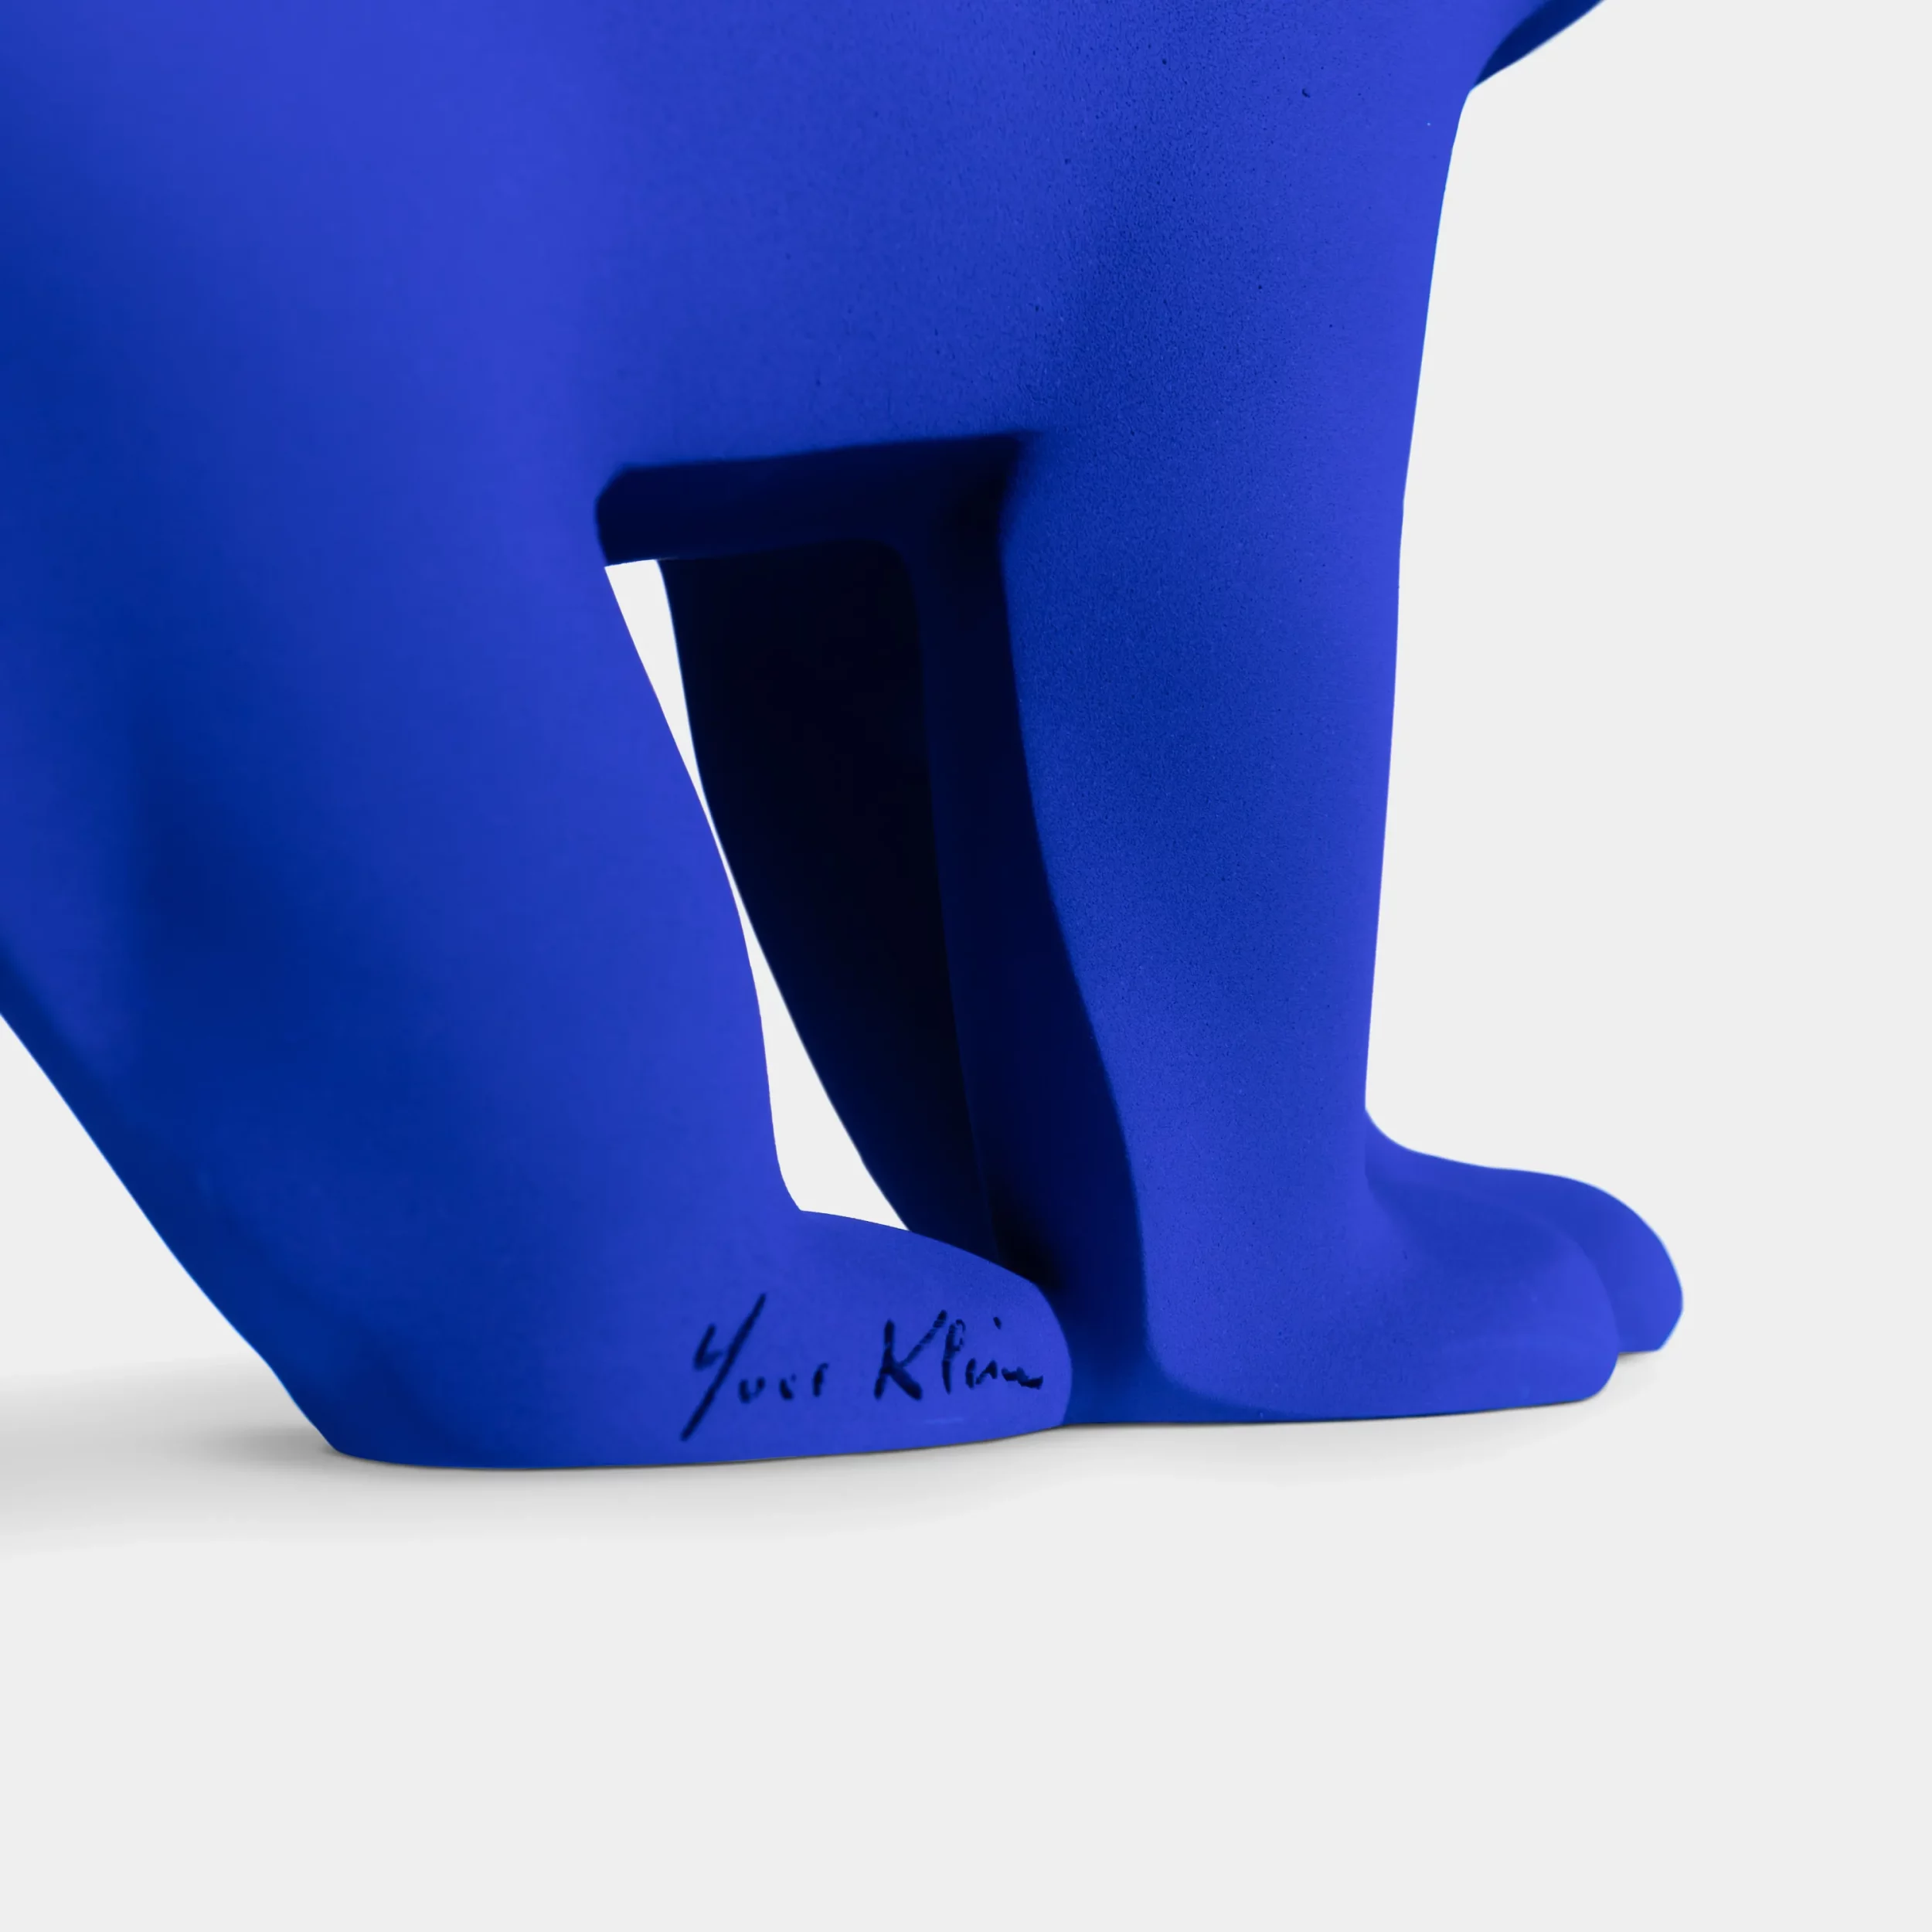 Close up on the Yves Klein signature on the IKB Pompon's bear